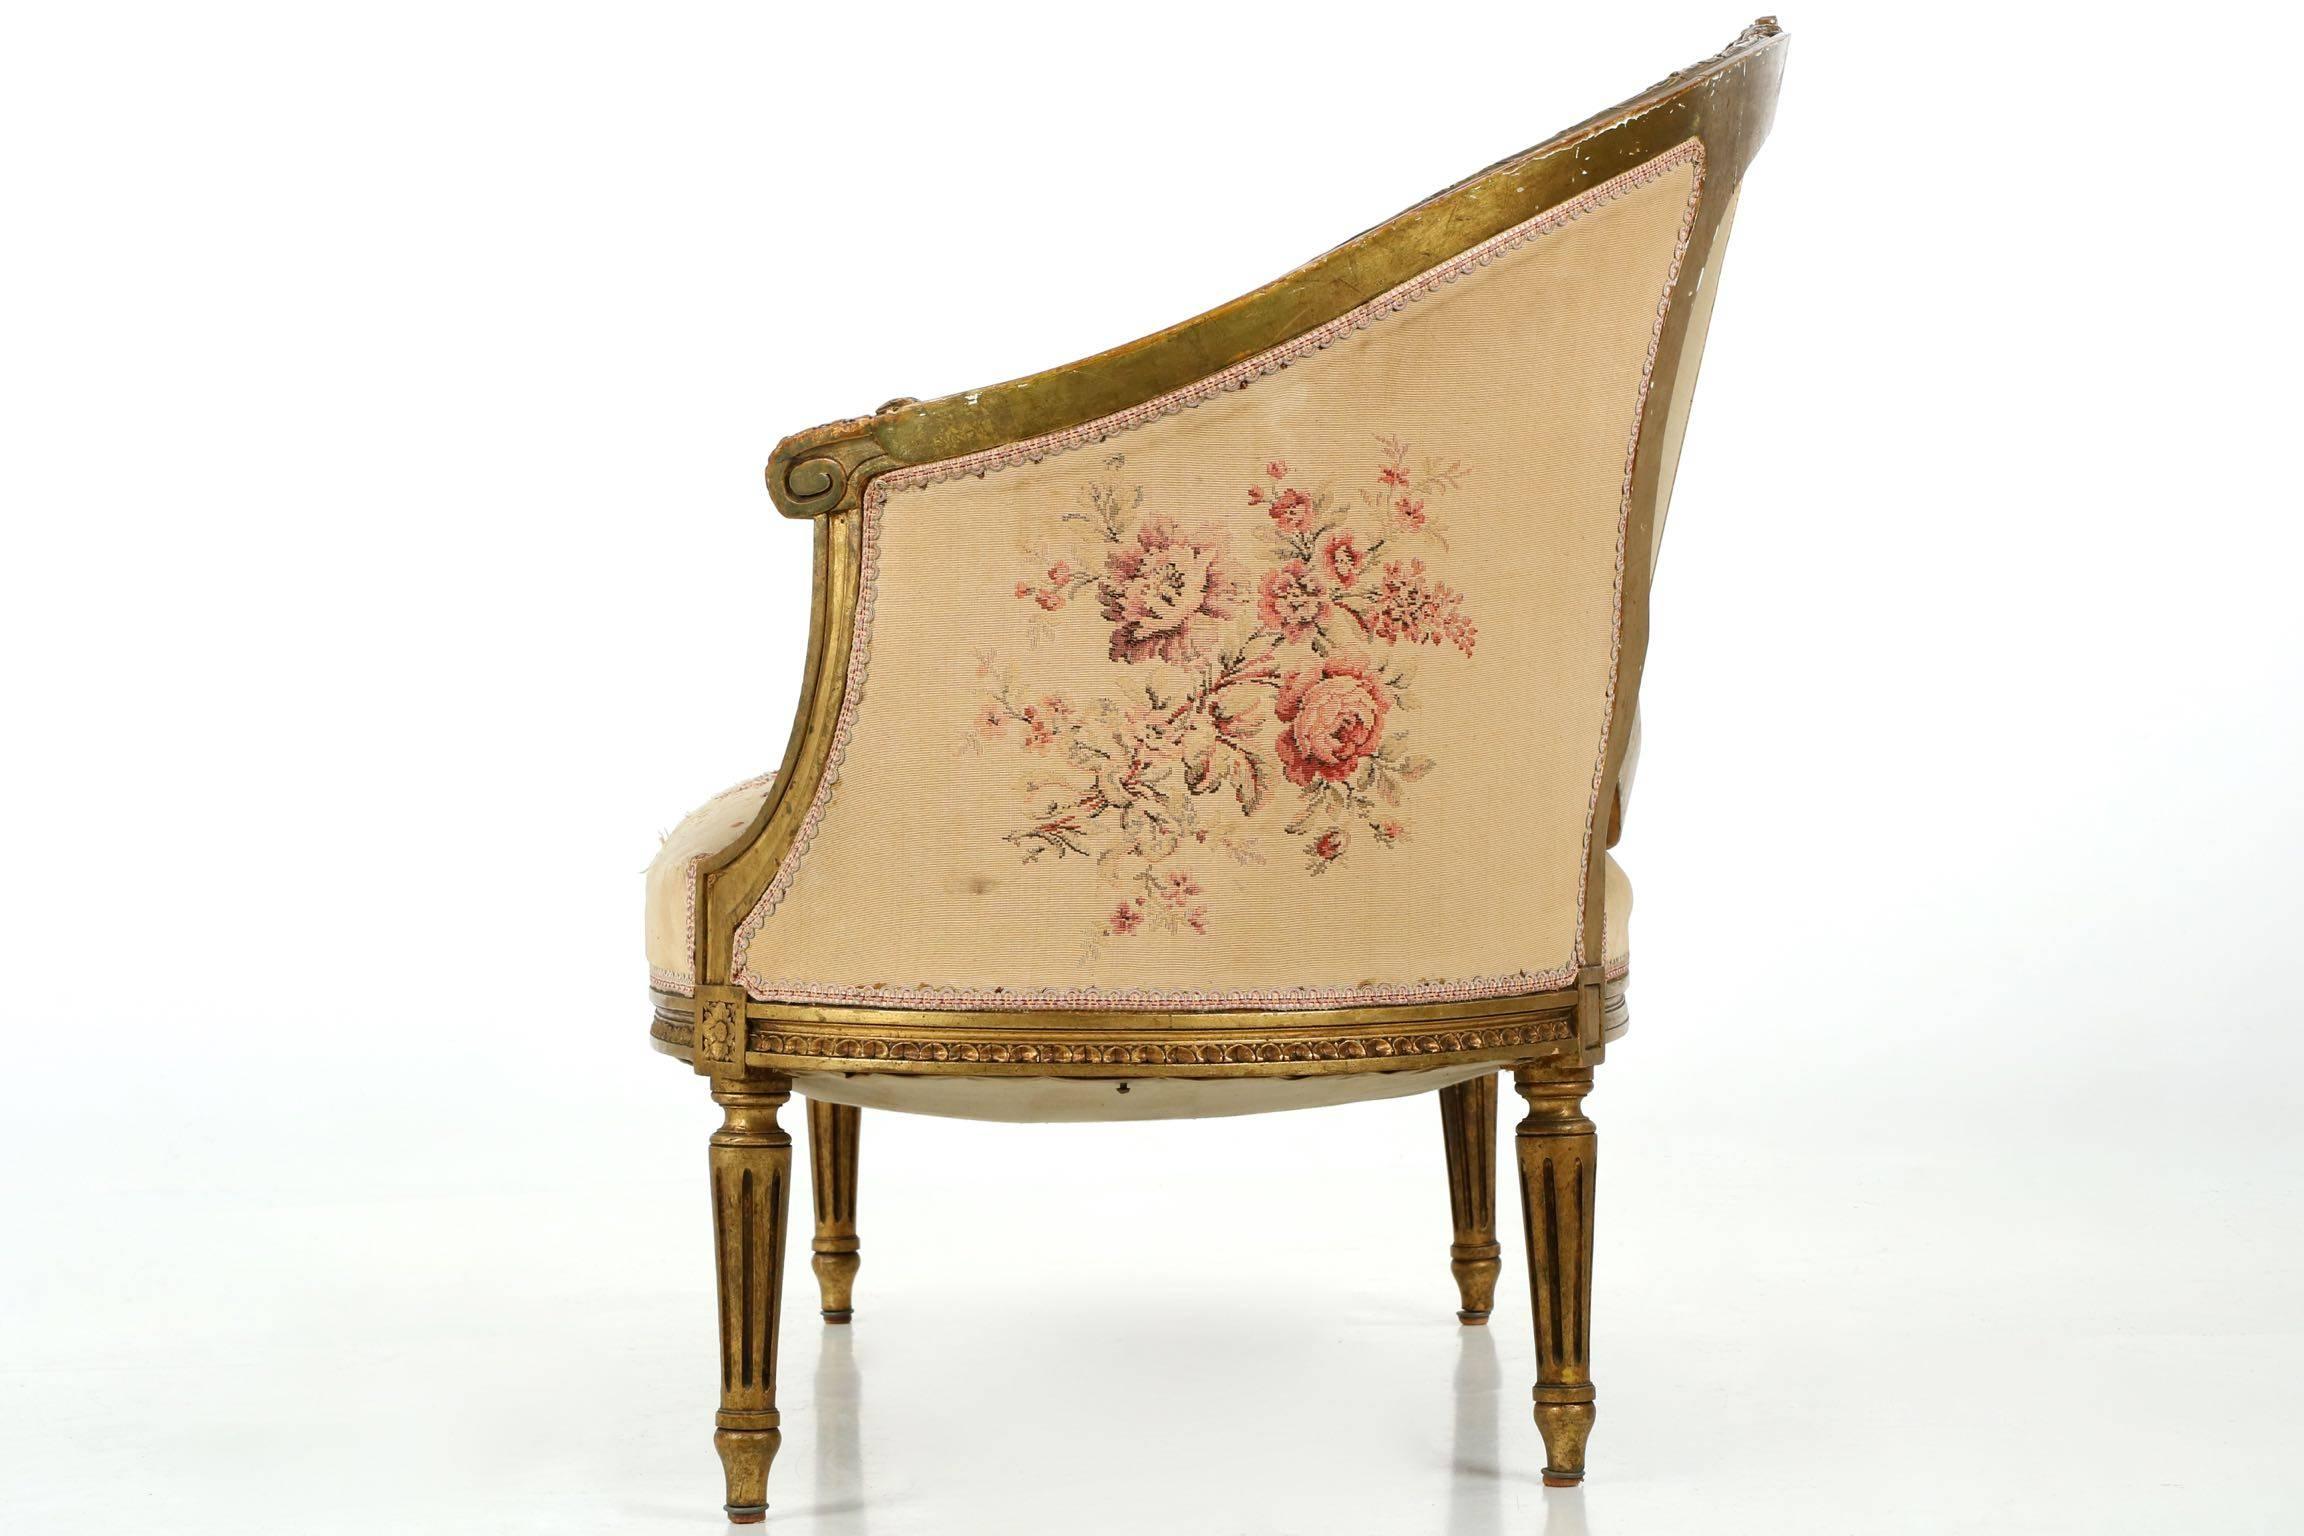 This gorgeous French Louis XVI style canapé was crafted during the last quarter of the 19th century, the surfaces are carved in the typical manner of the period with highly detailed ribbon work along the crest among foliage, the frame a repeating